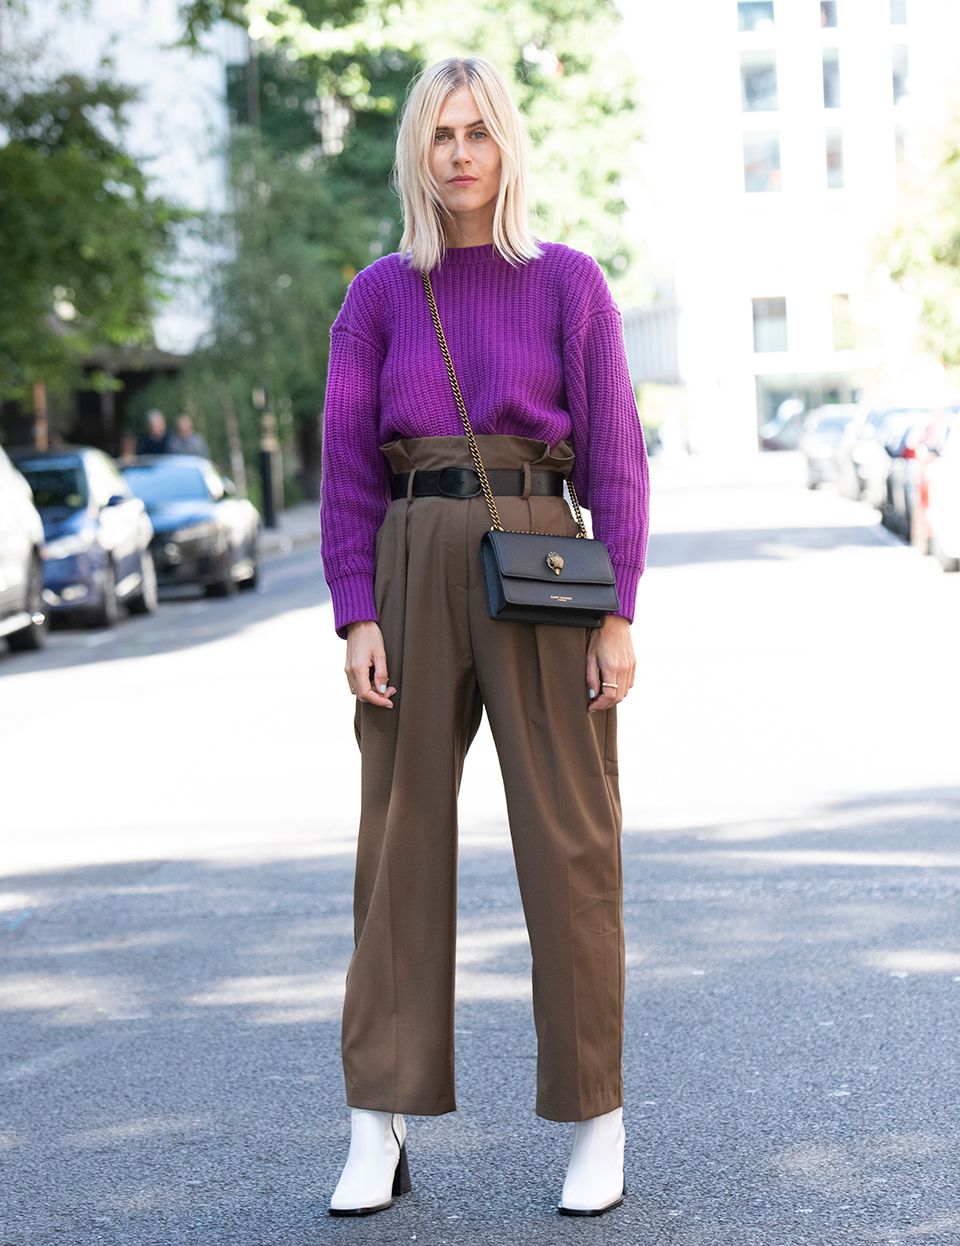 How to style a belt with trousers